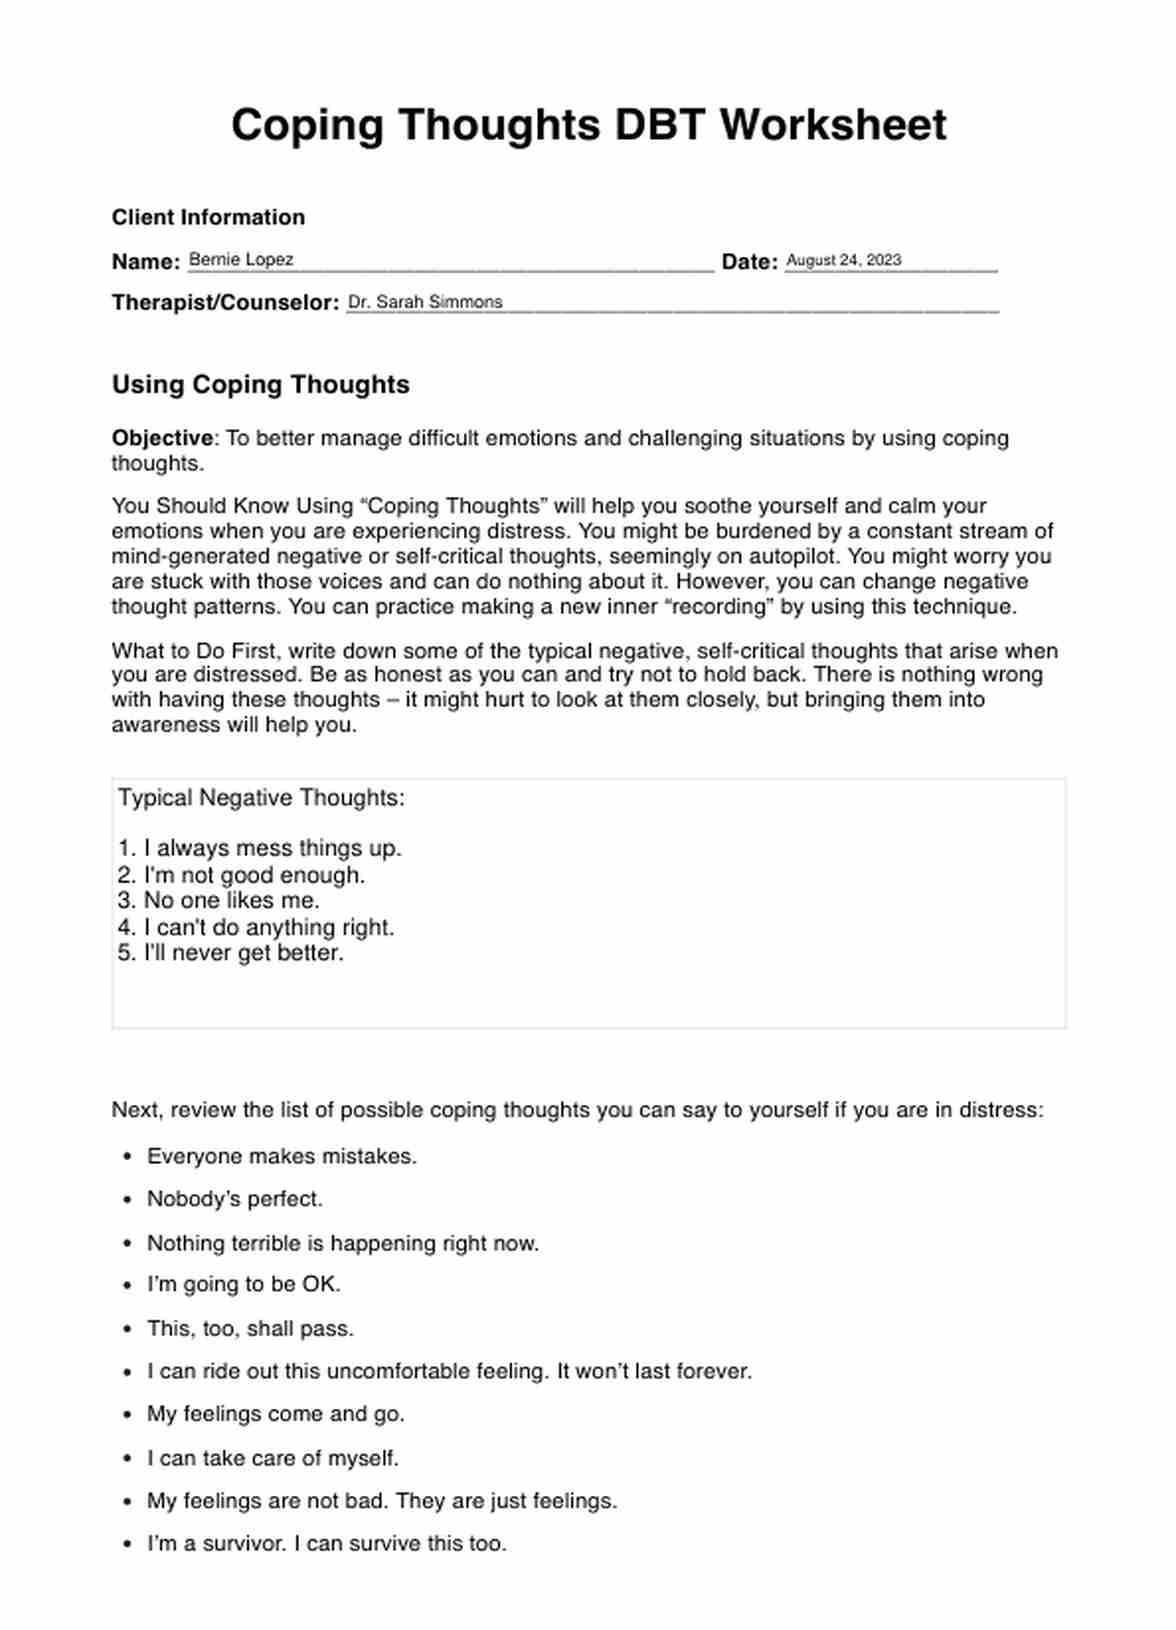 Coping Thoughts DBT Worksheet PDF Example